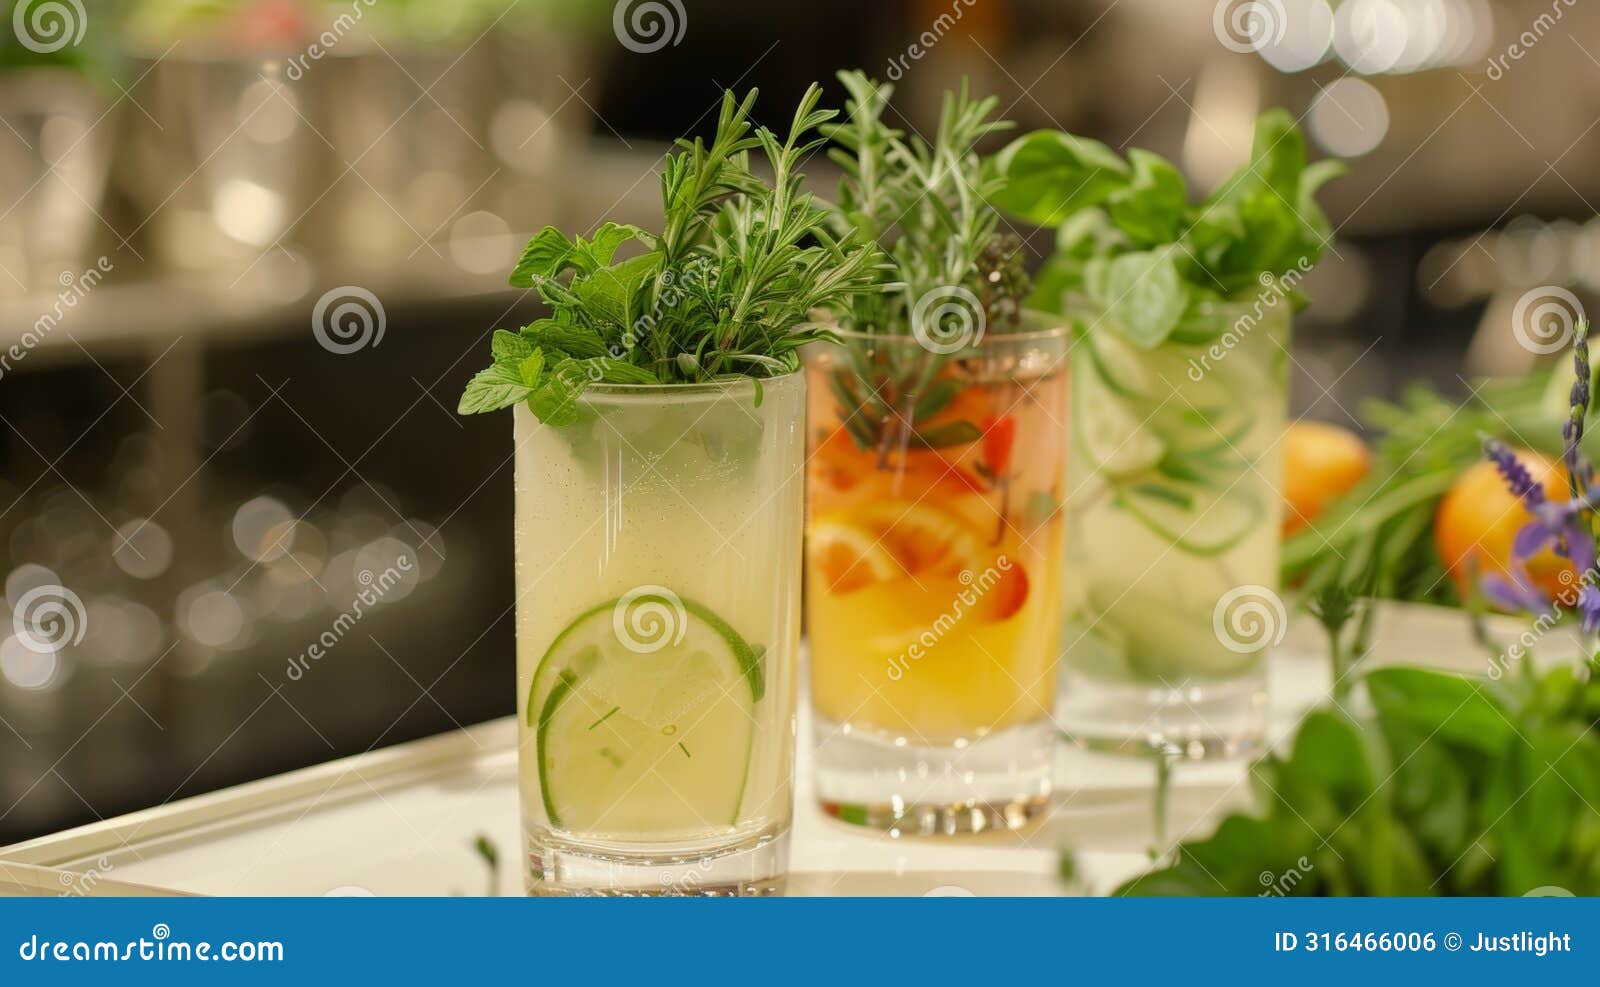 a mocktail mixology class where participants learn to create sophisticated nonalcoholic drinks using fresh herbs